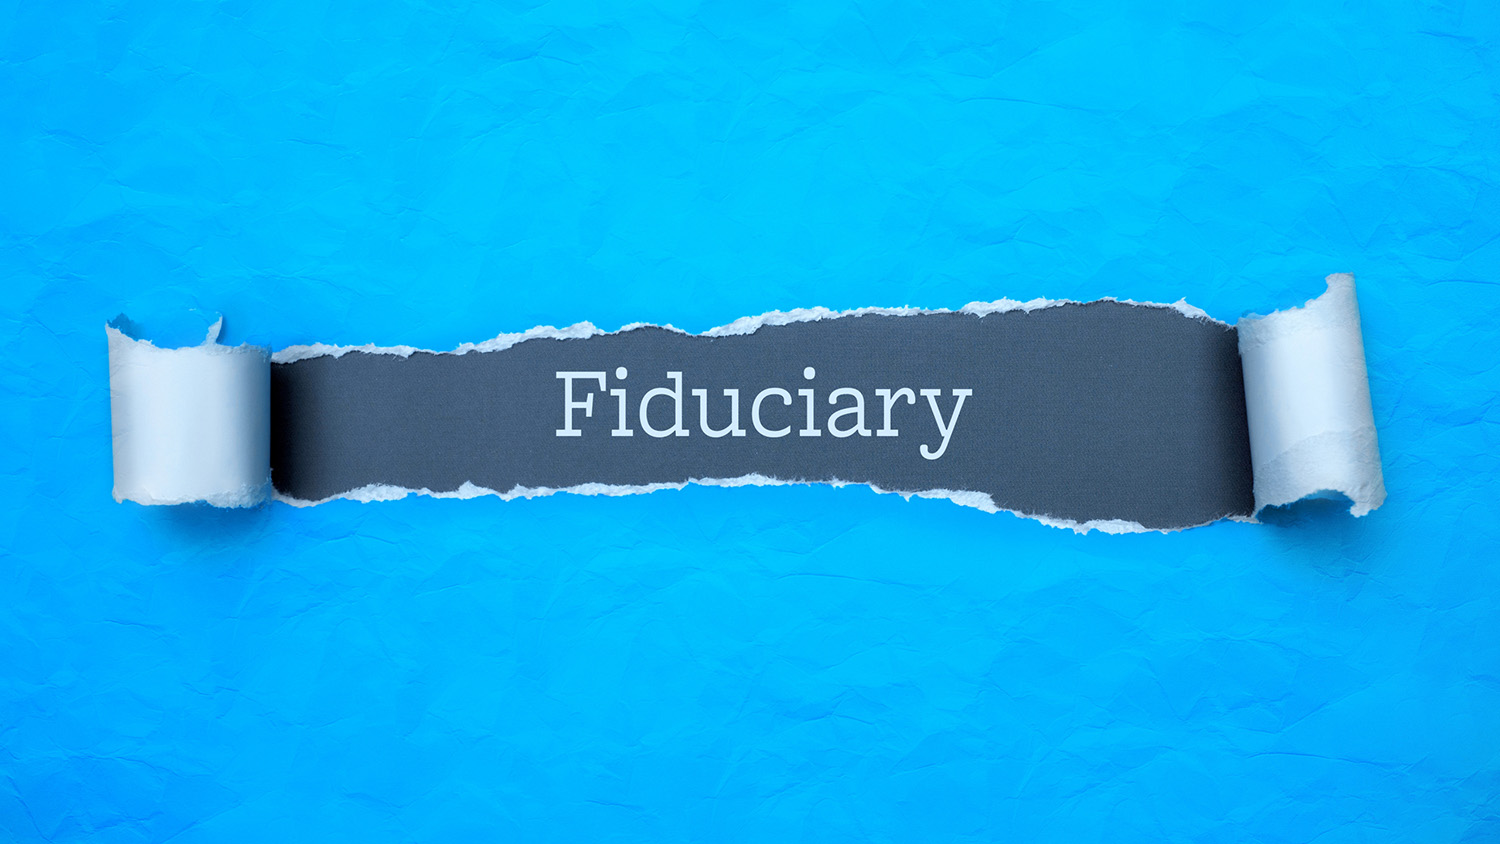 Fiduciary behind ripped paper